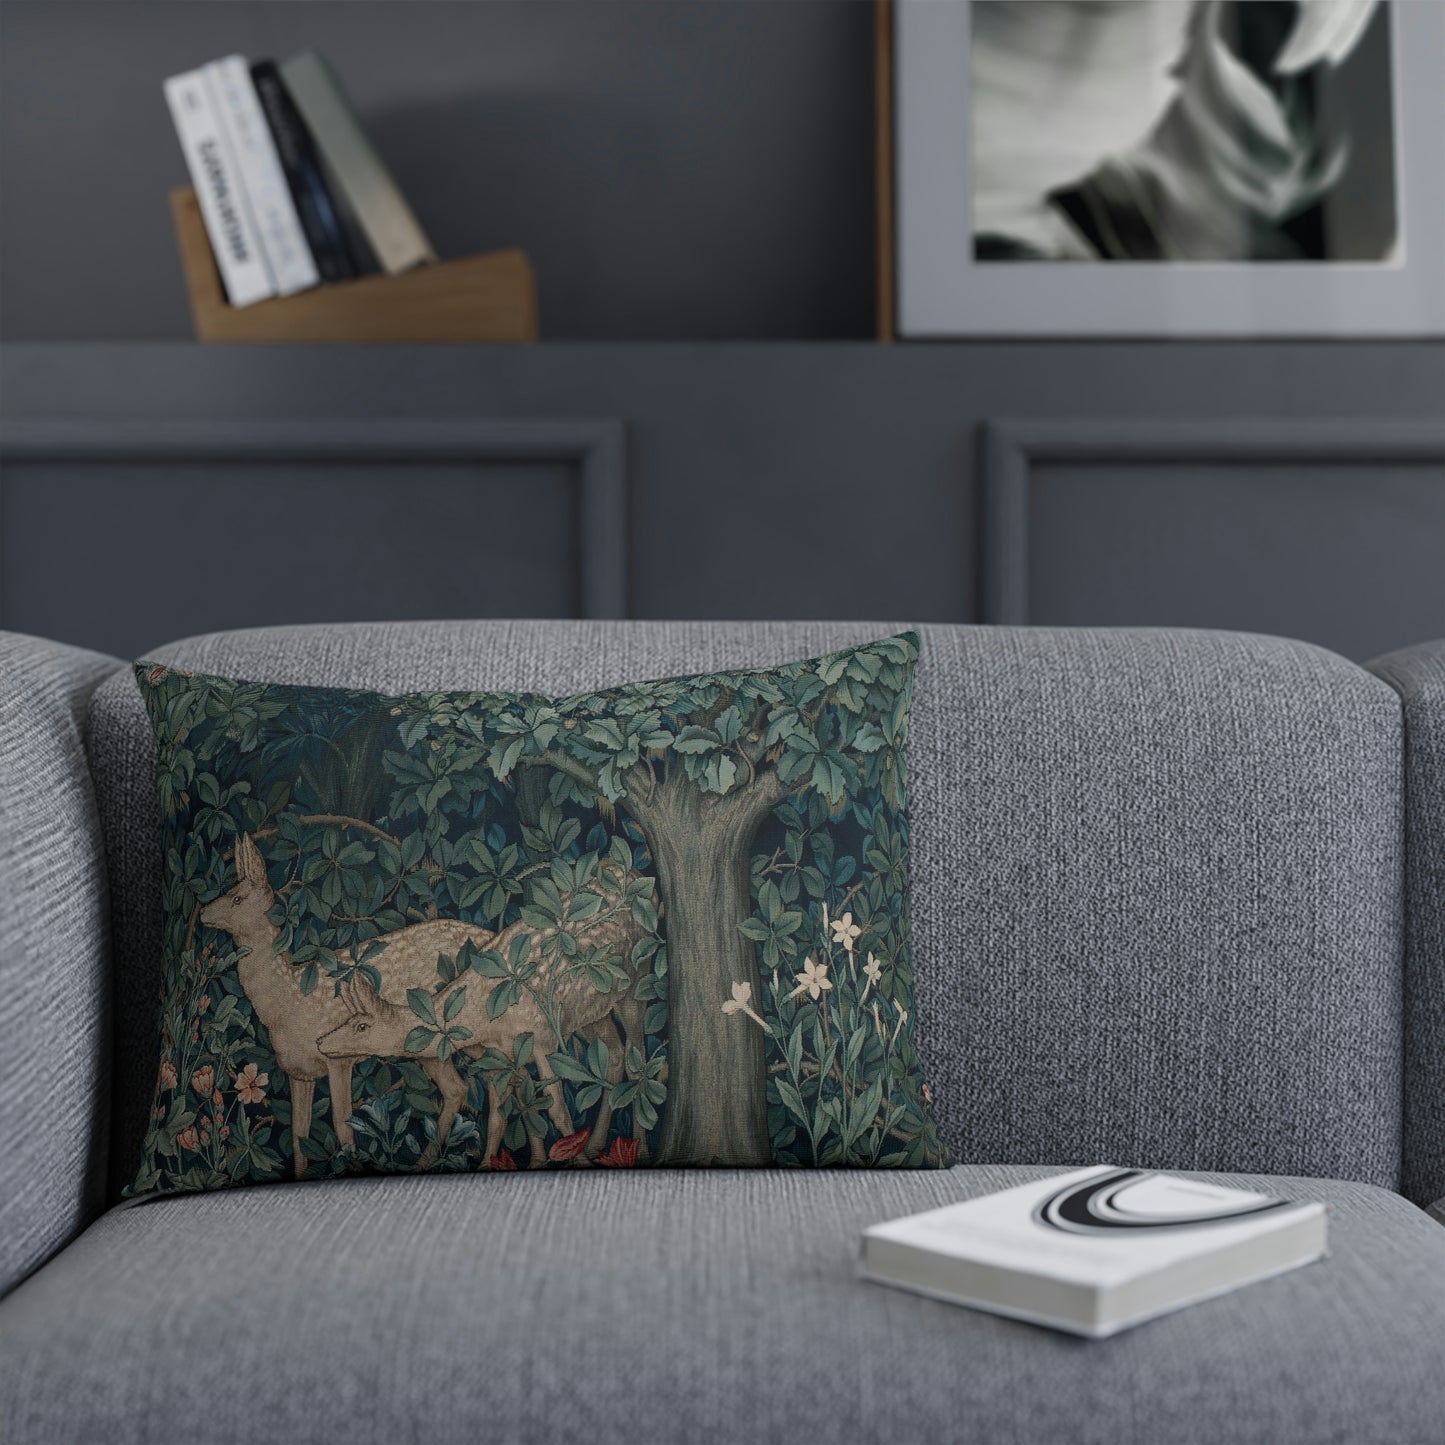 William-Morris-and-Co-Cushion-and-Cushion-Cover-Dear-by-John-Henry-Dearle-Green-Forest-Collection-13